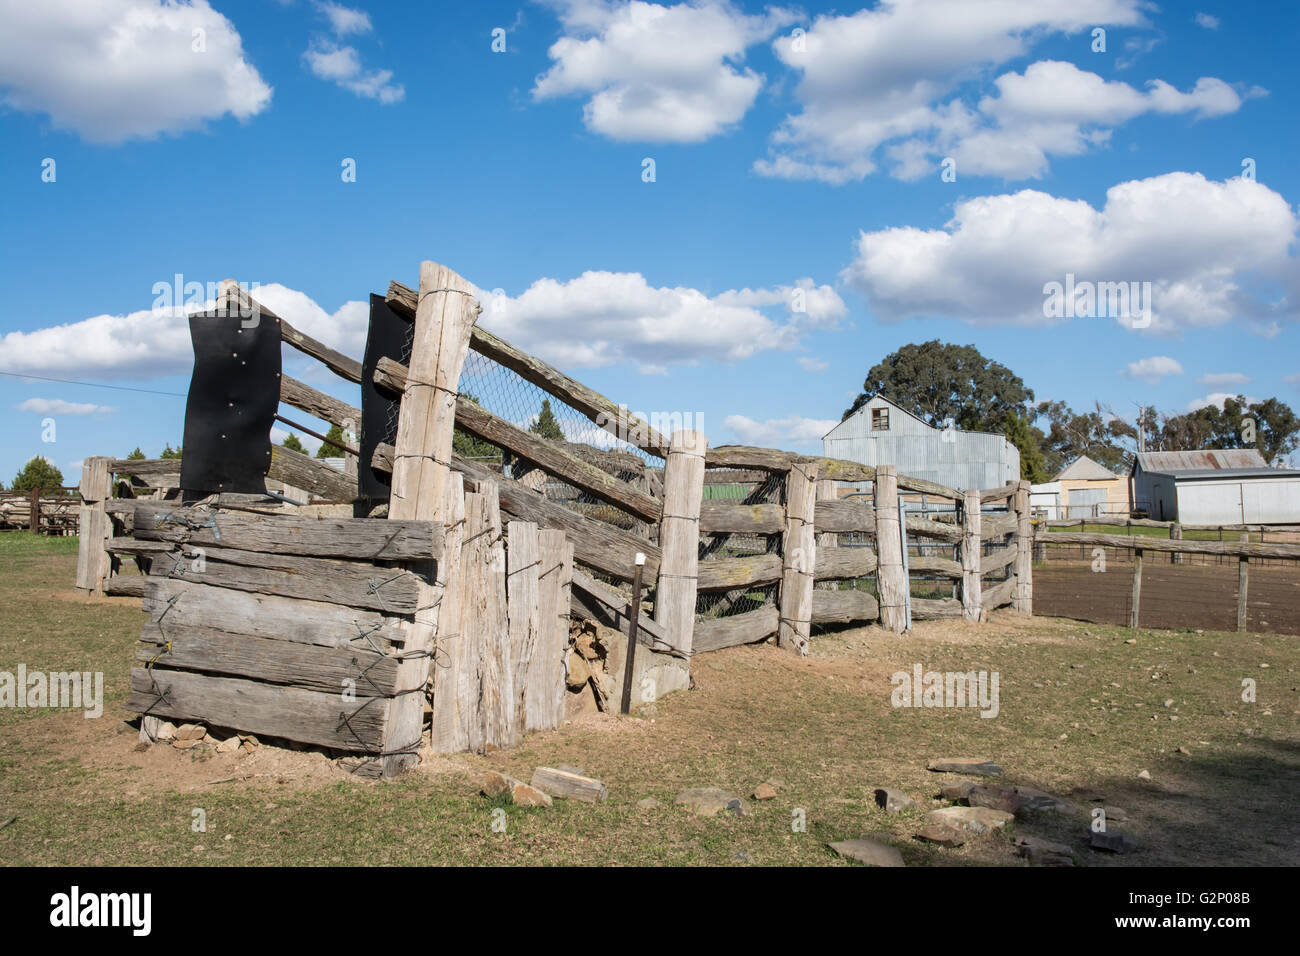 An old Weathered Timber Sheep and Cattle Loading Ramp at Uralla NSW Australia Stock Photo